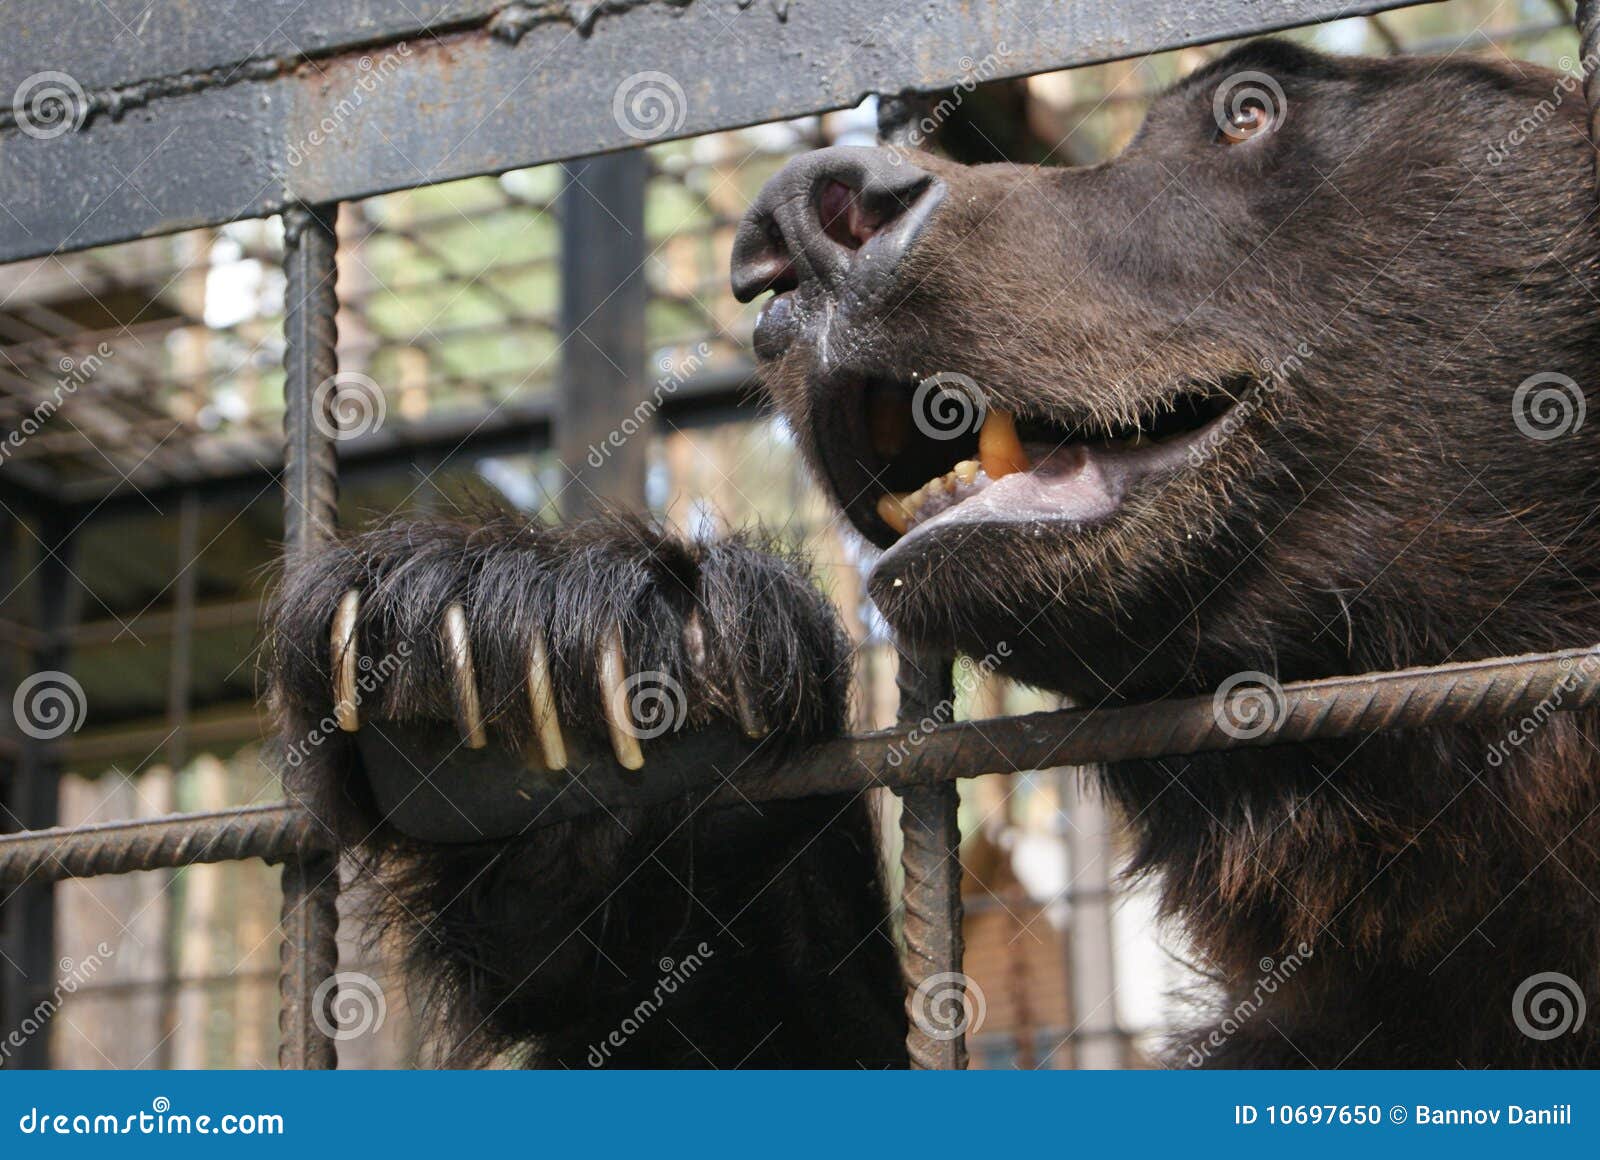 brown bear in cage